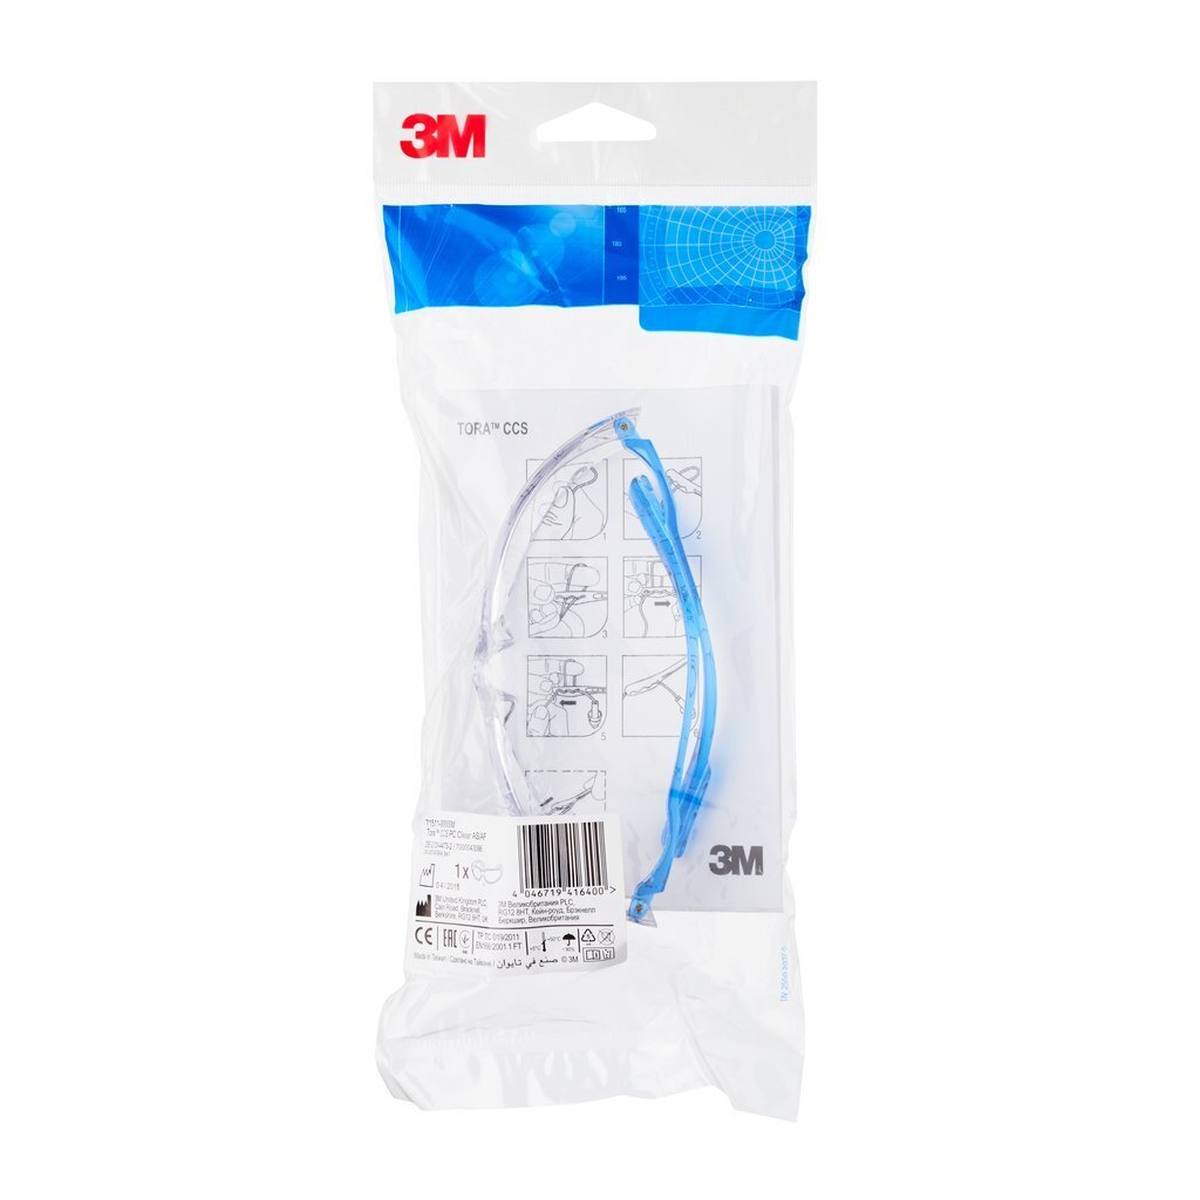 3M Tora CCS safety spectacles AS/AF/UV, PC, clear (can be combined with all 3M earplugs with plastic cord)